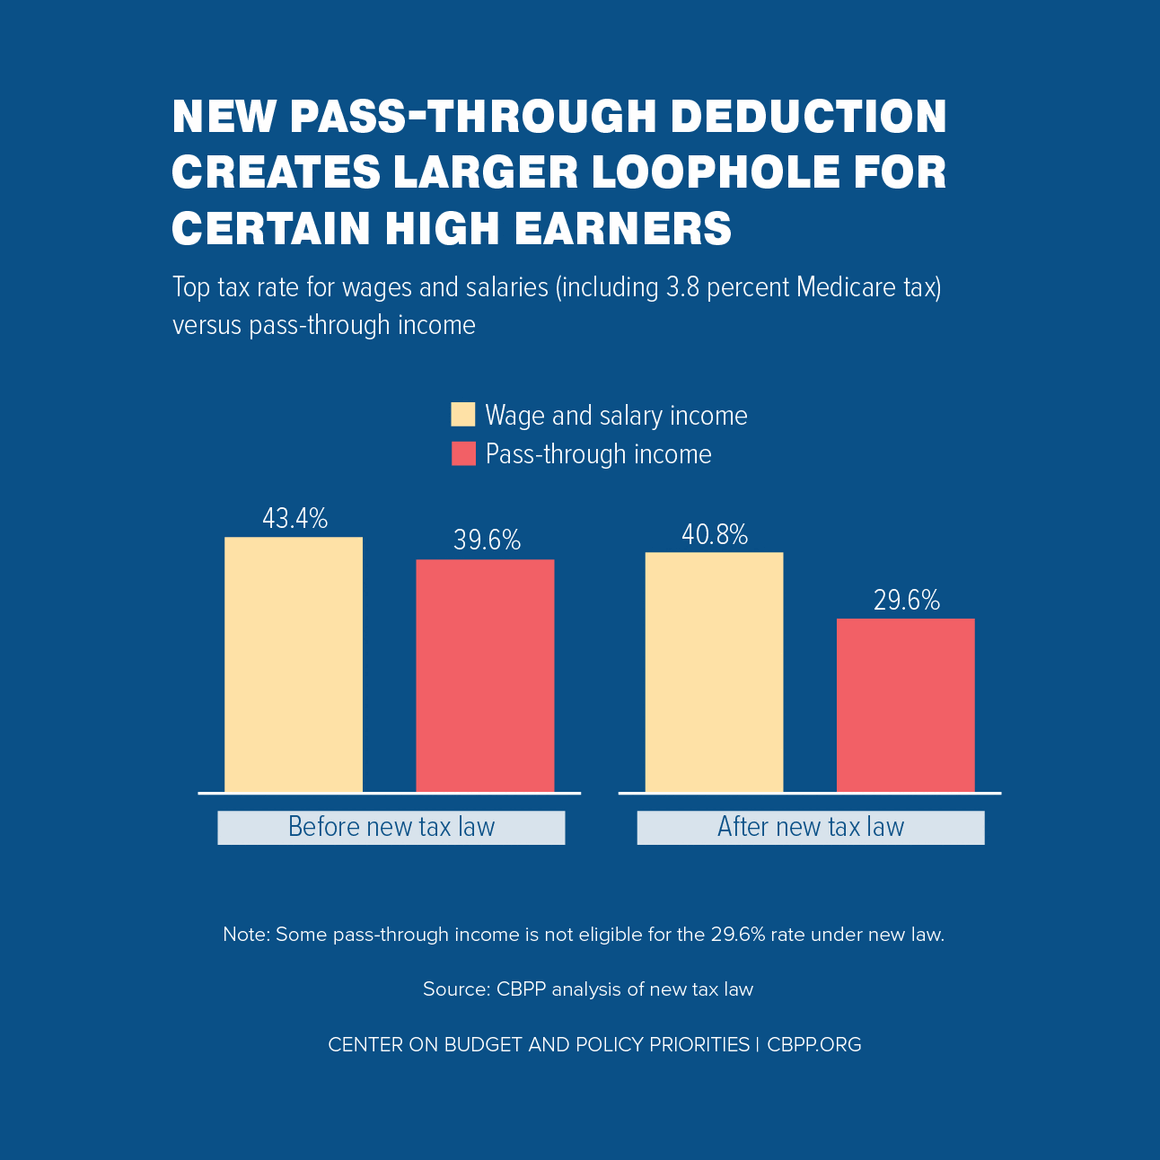 New Pass-Through Deduction Creates Larger Loophole for Certain High Earners